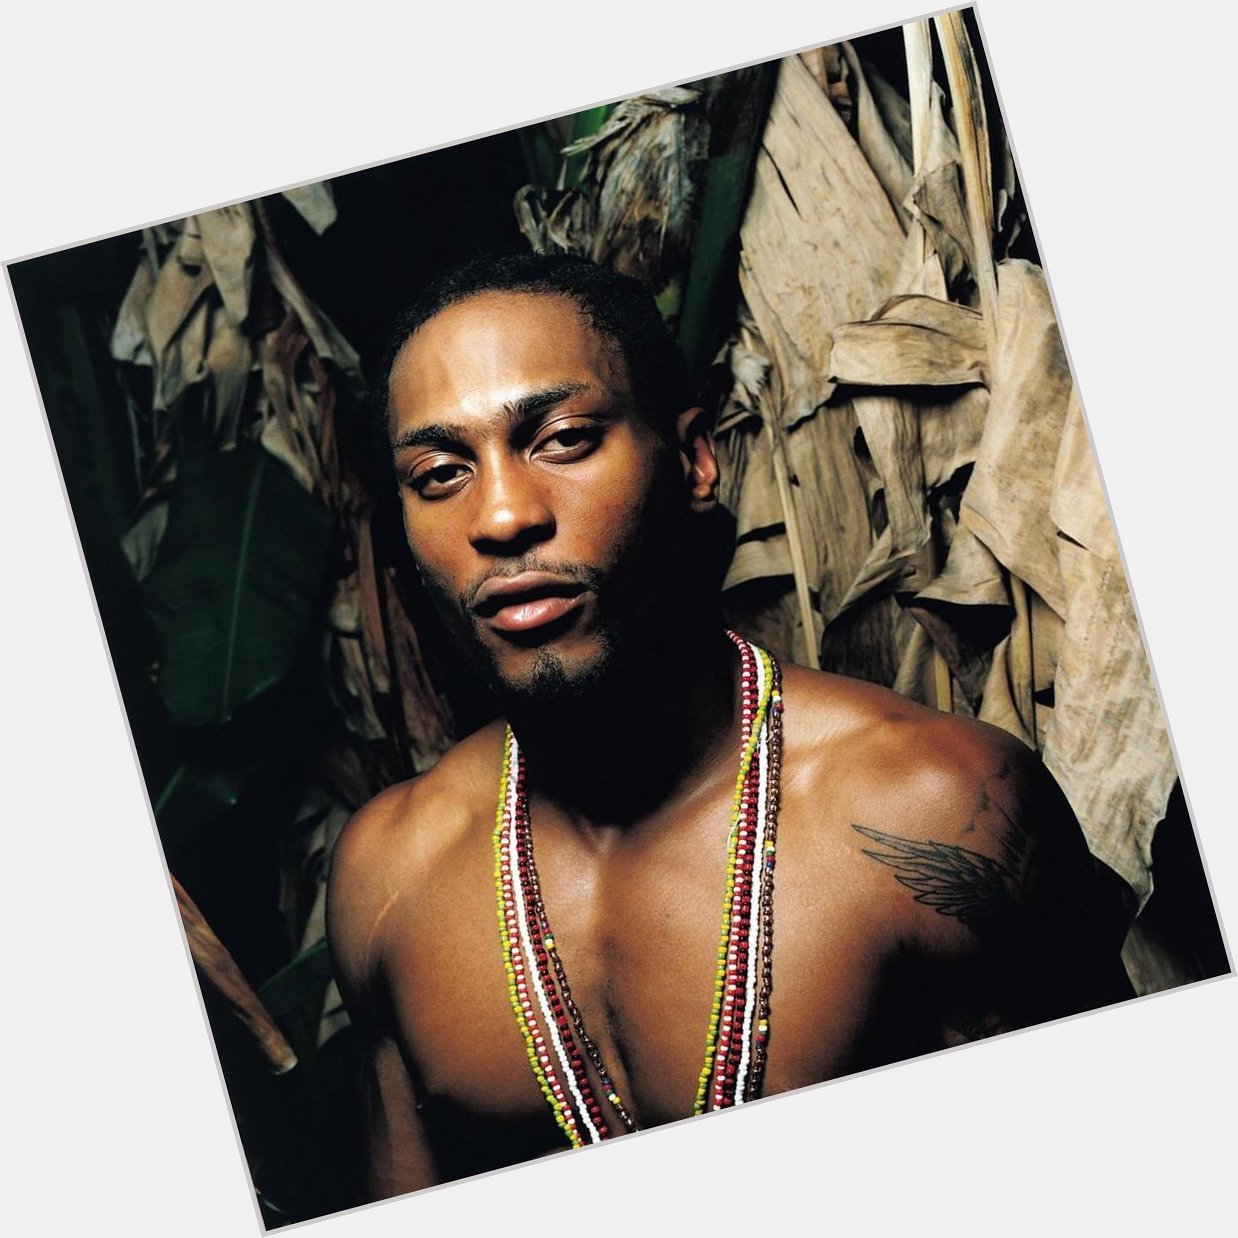 Happy 48th Birthday to singer, songwriter, multi-instrumentalist and record producer D Angelo 